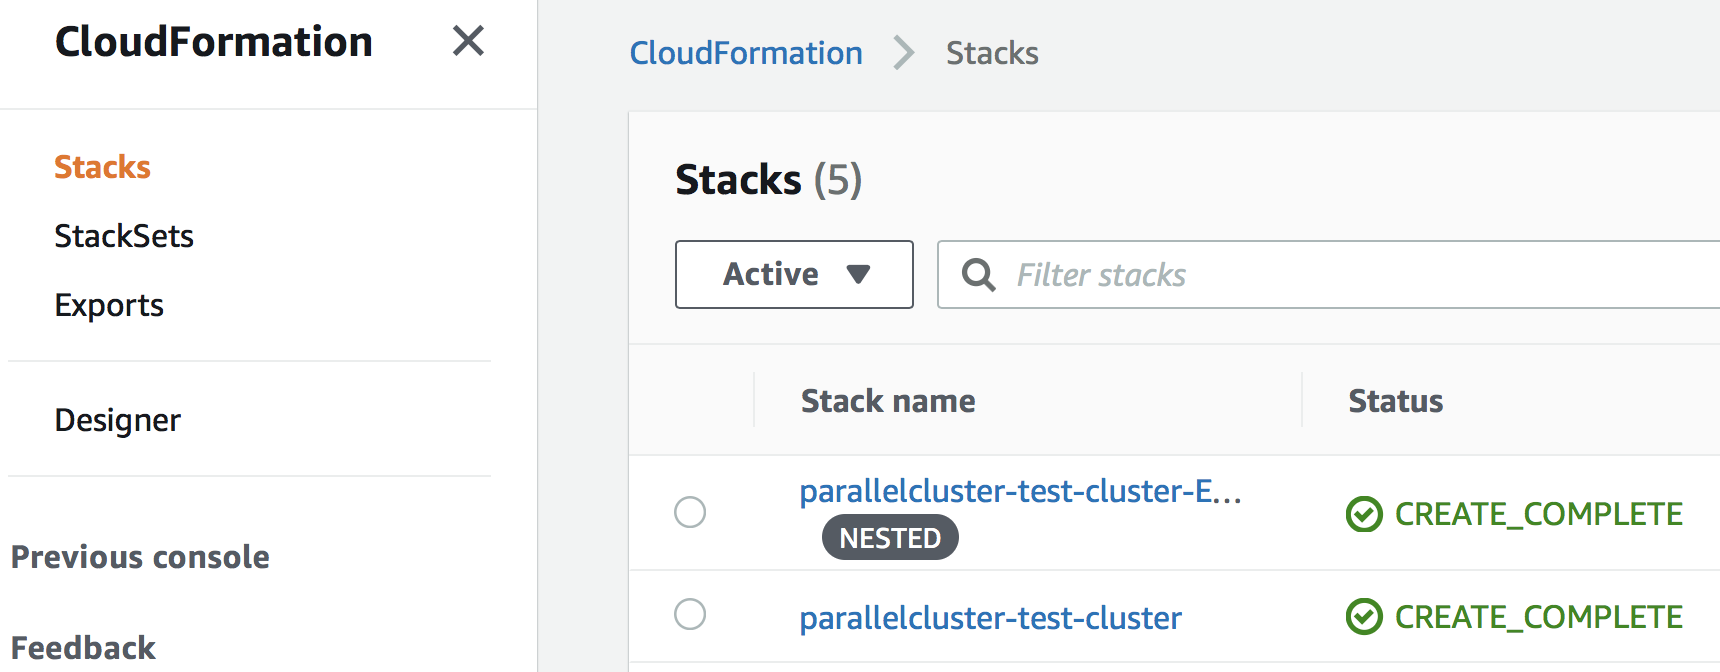 /images/pcluster_components/cloudformation.png